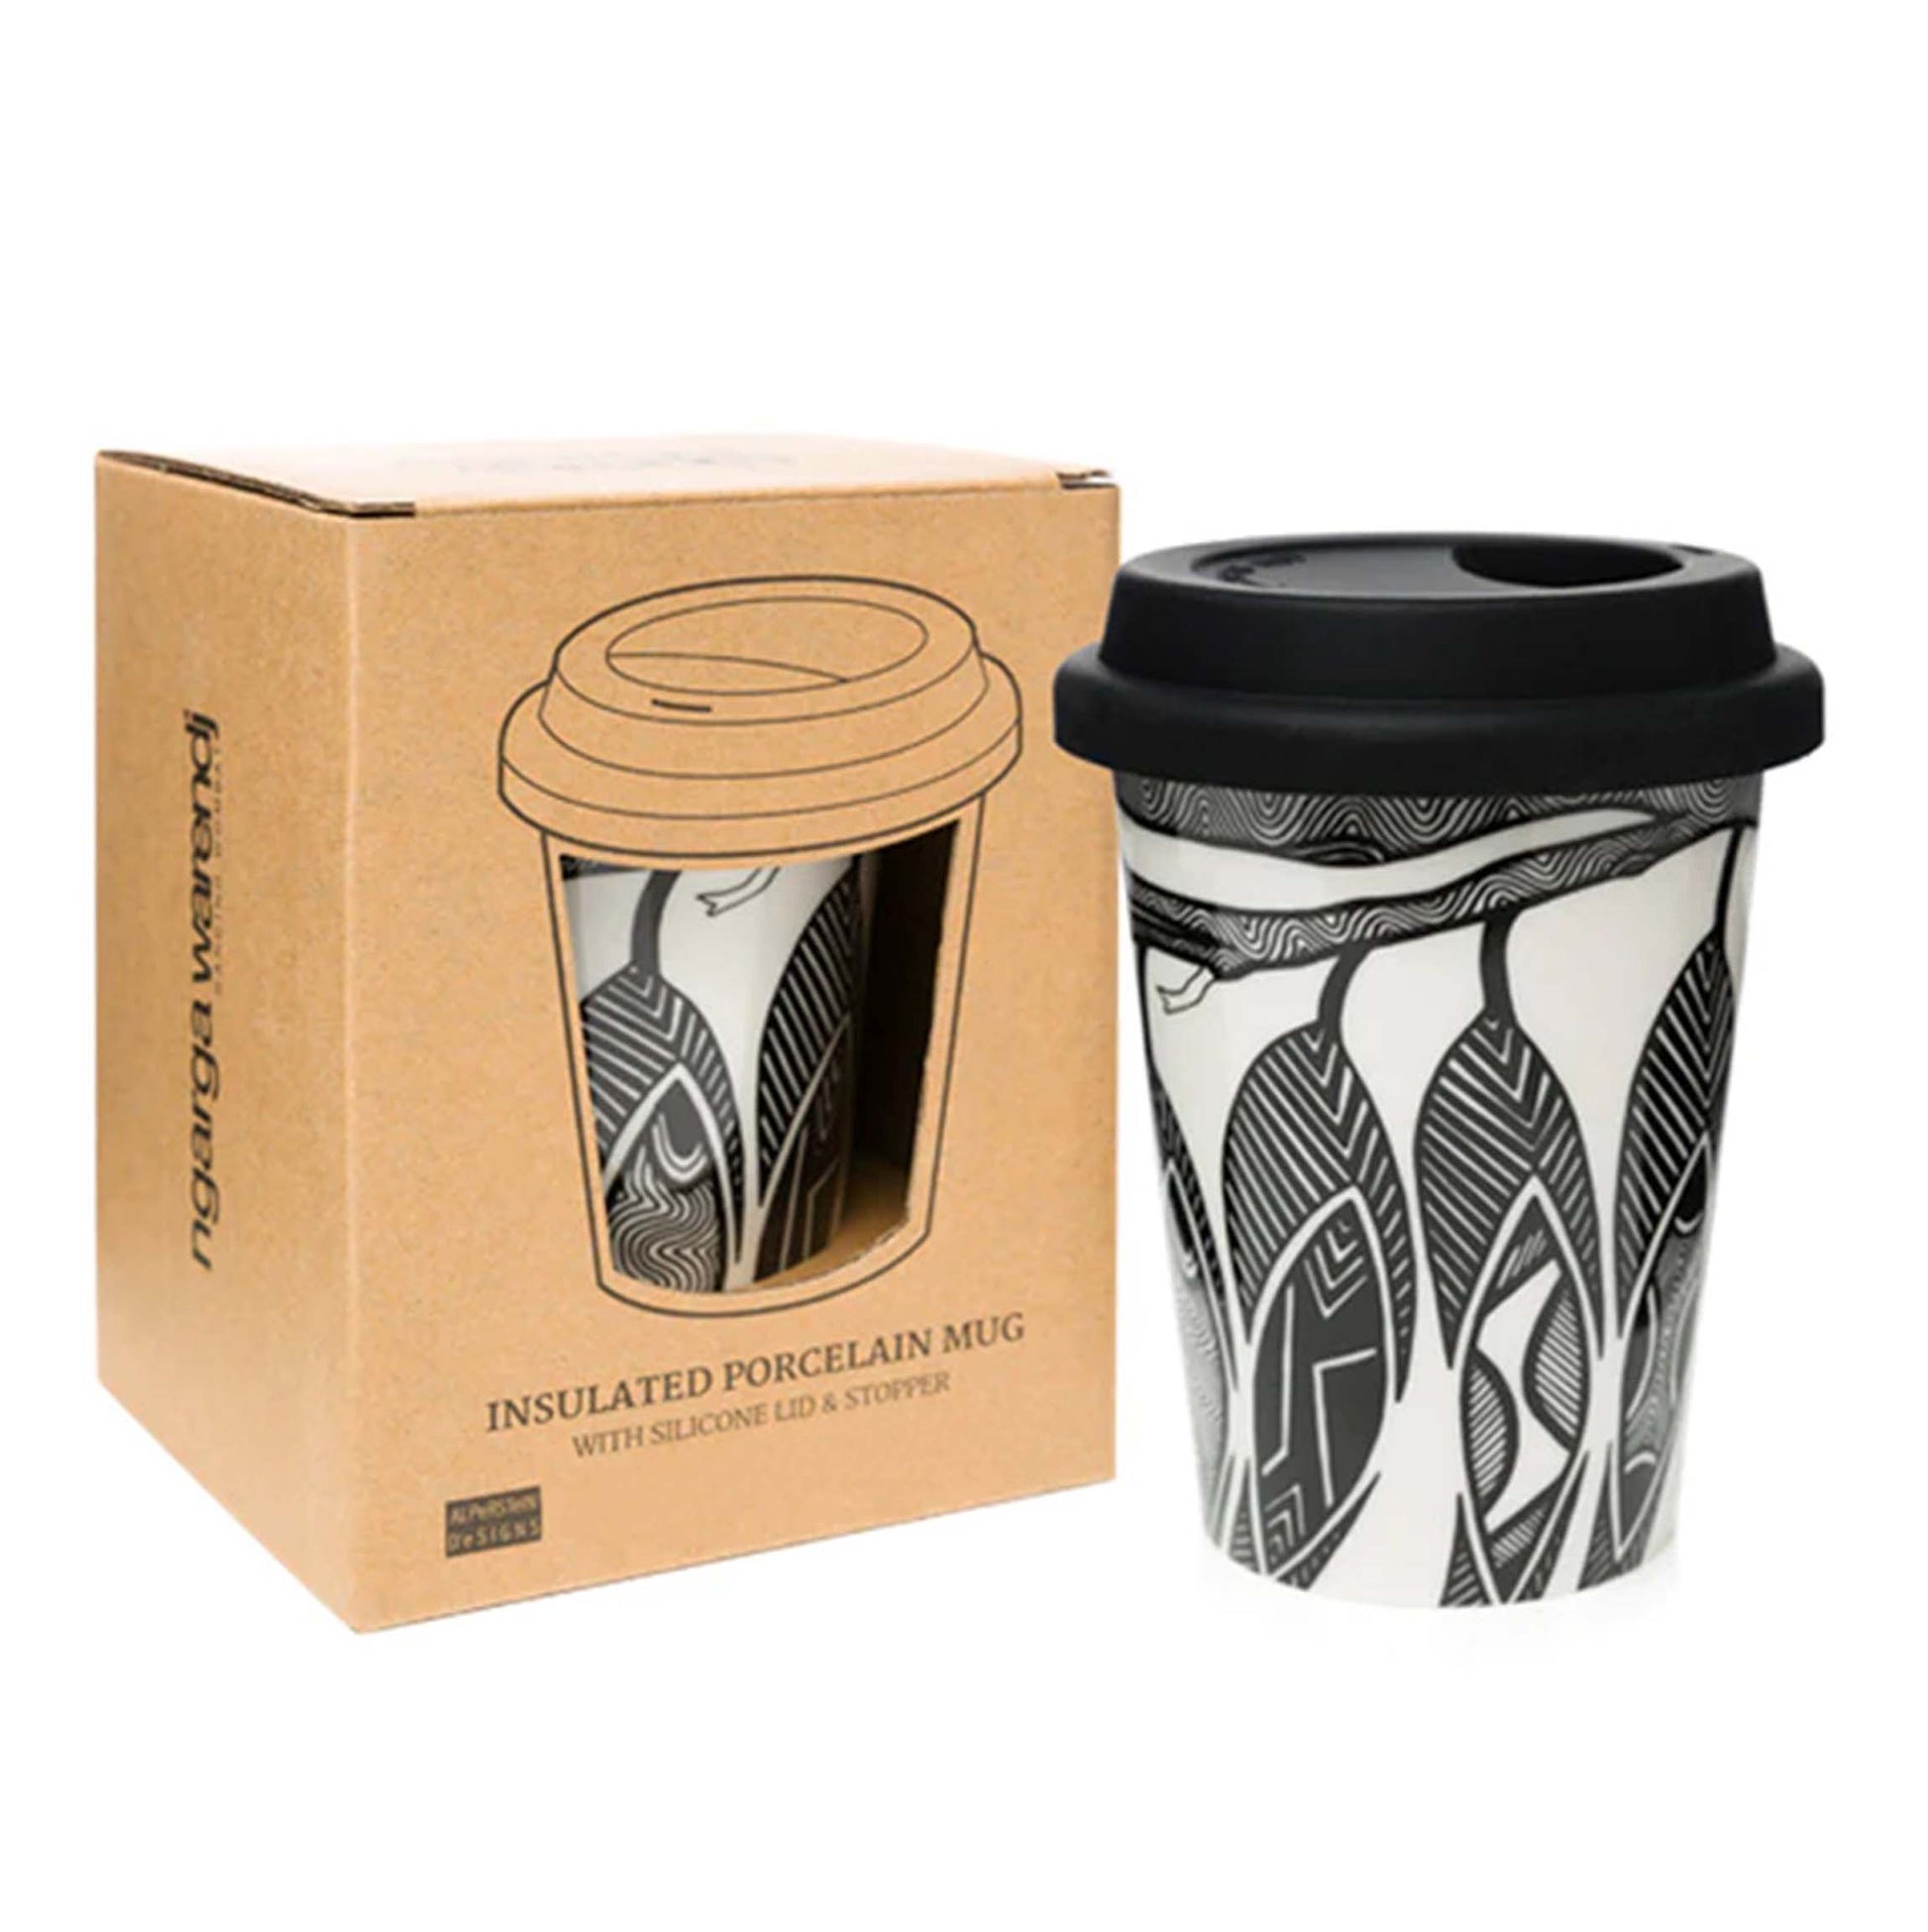 insulated porcelain mug in black and white reusable cup with personalised sleeve with coffee name and order